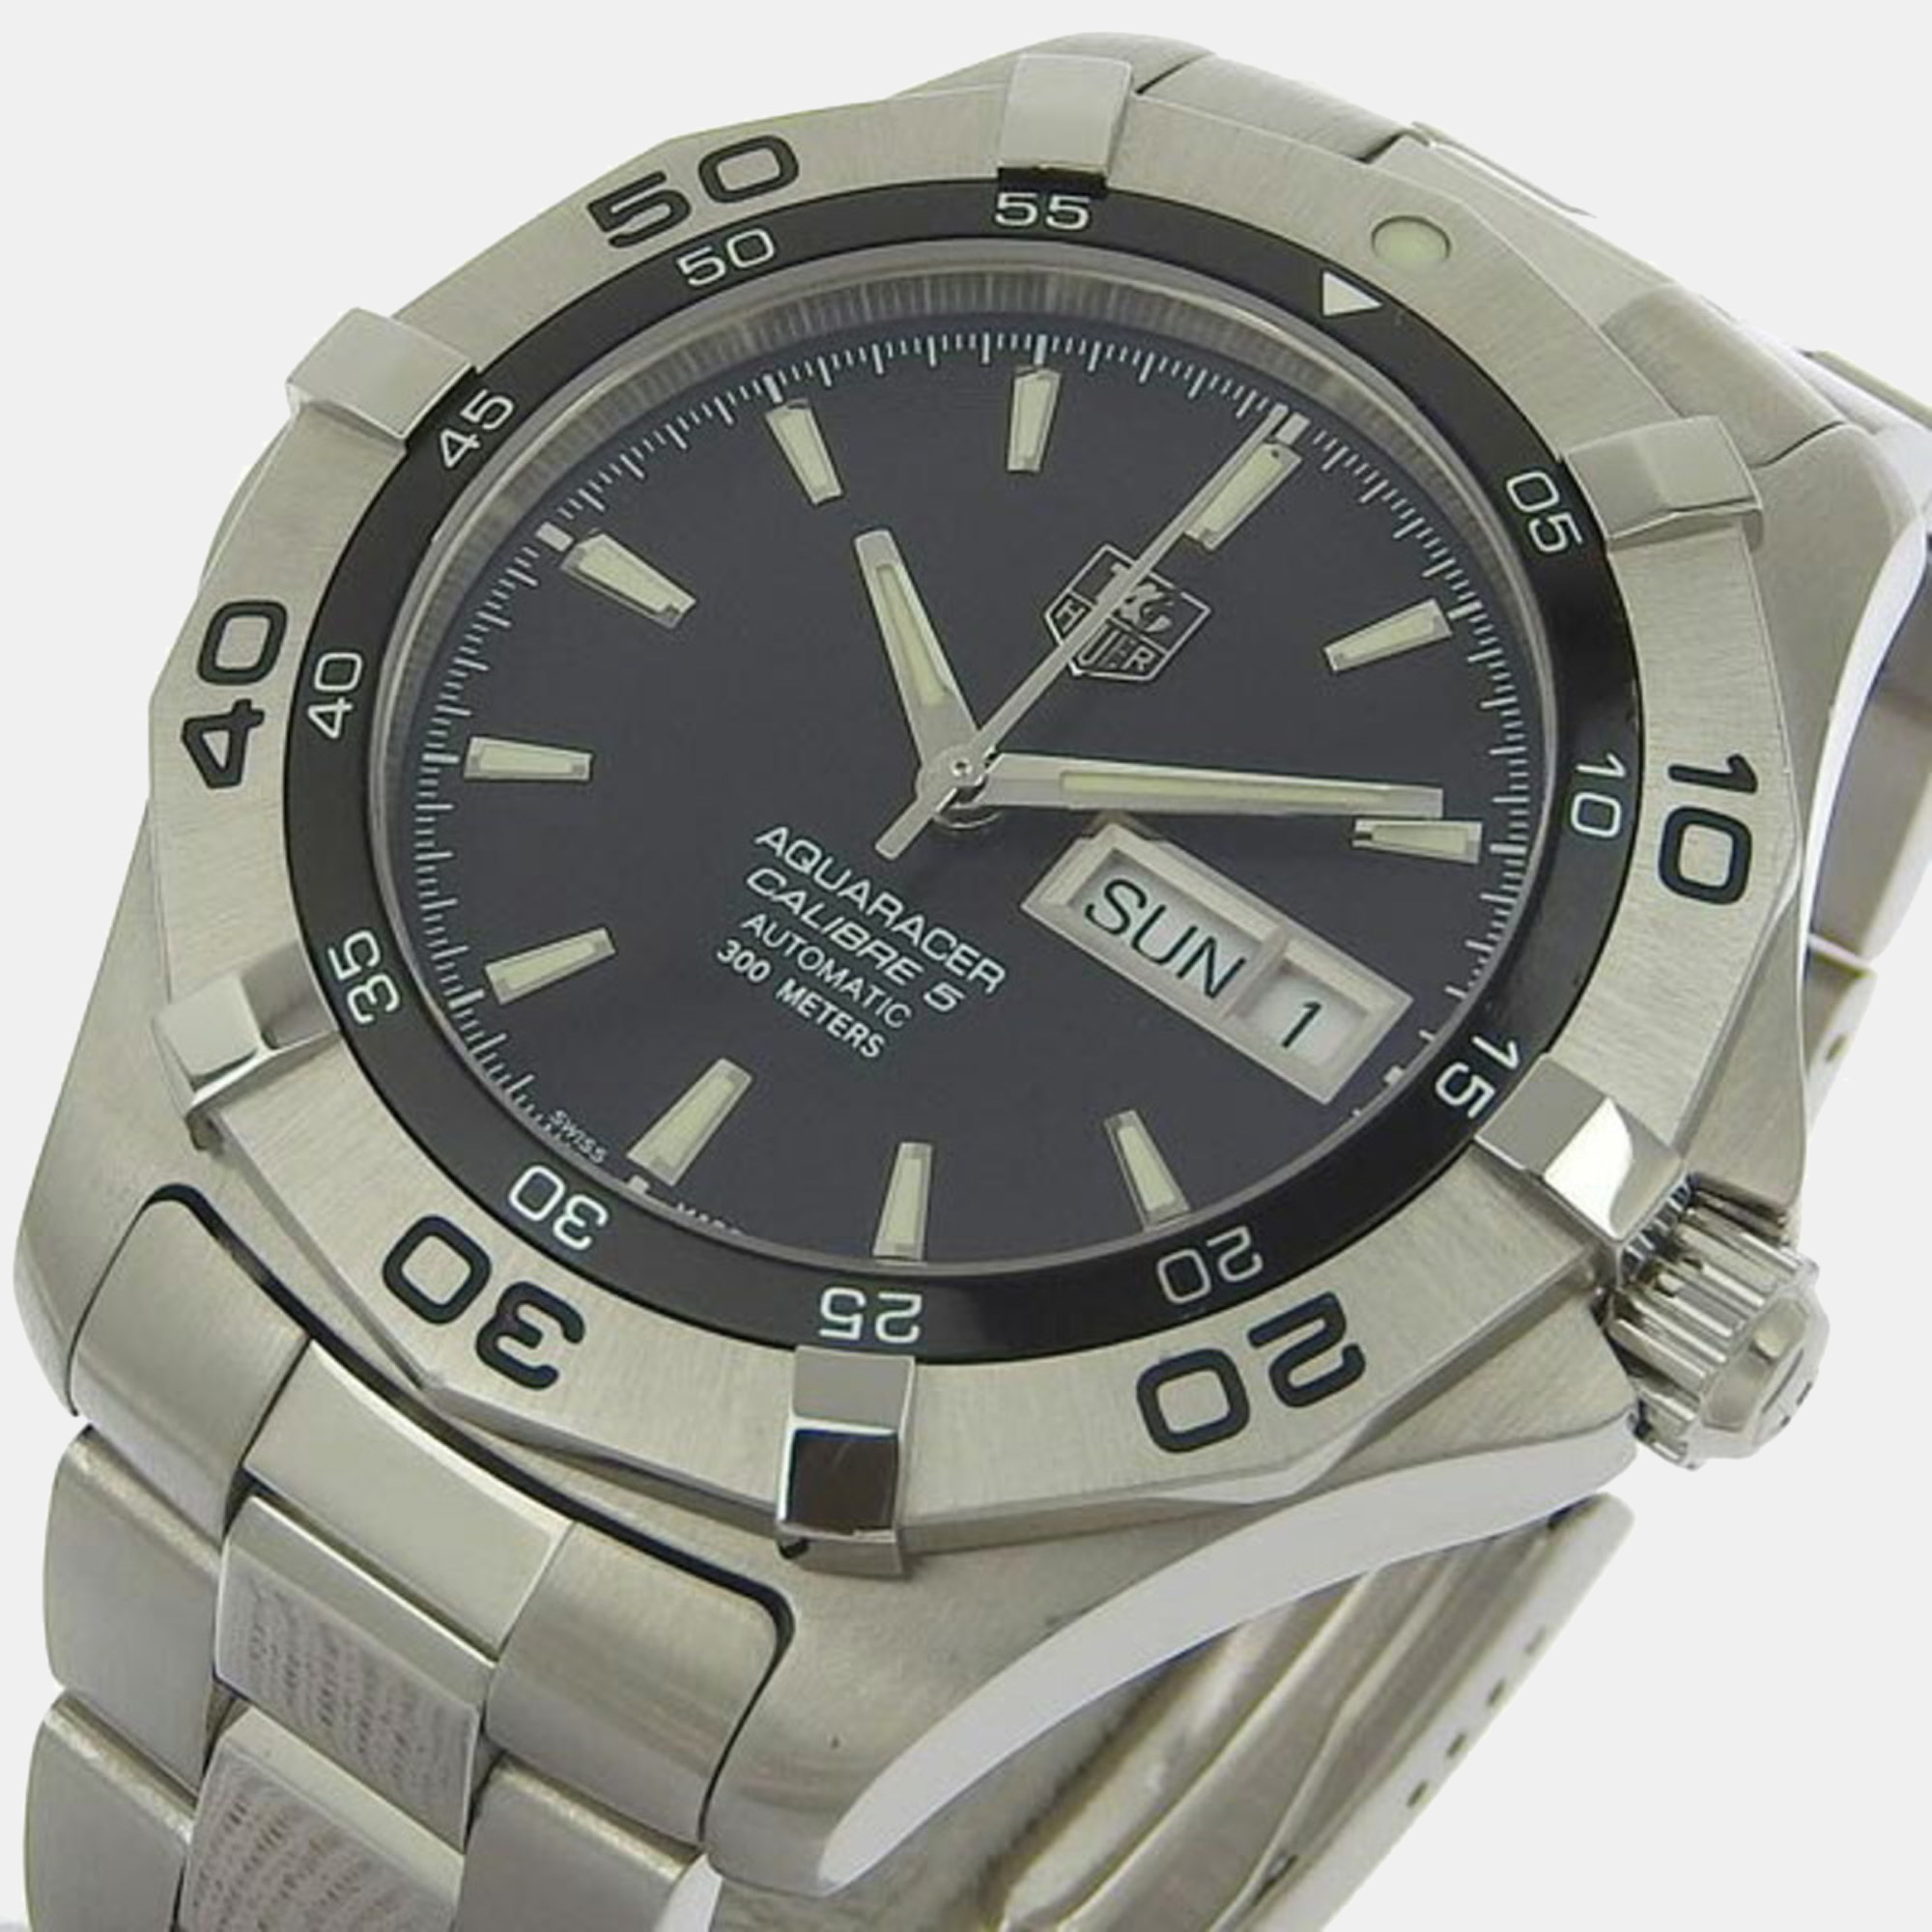 

Tag Heuer Black Stainless Steel Aquaracer WAF2010 Automatic Men's Wristwatch 42 mm